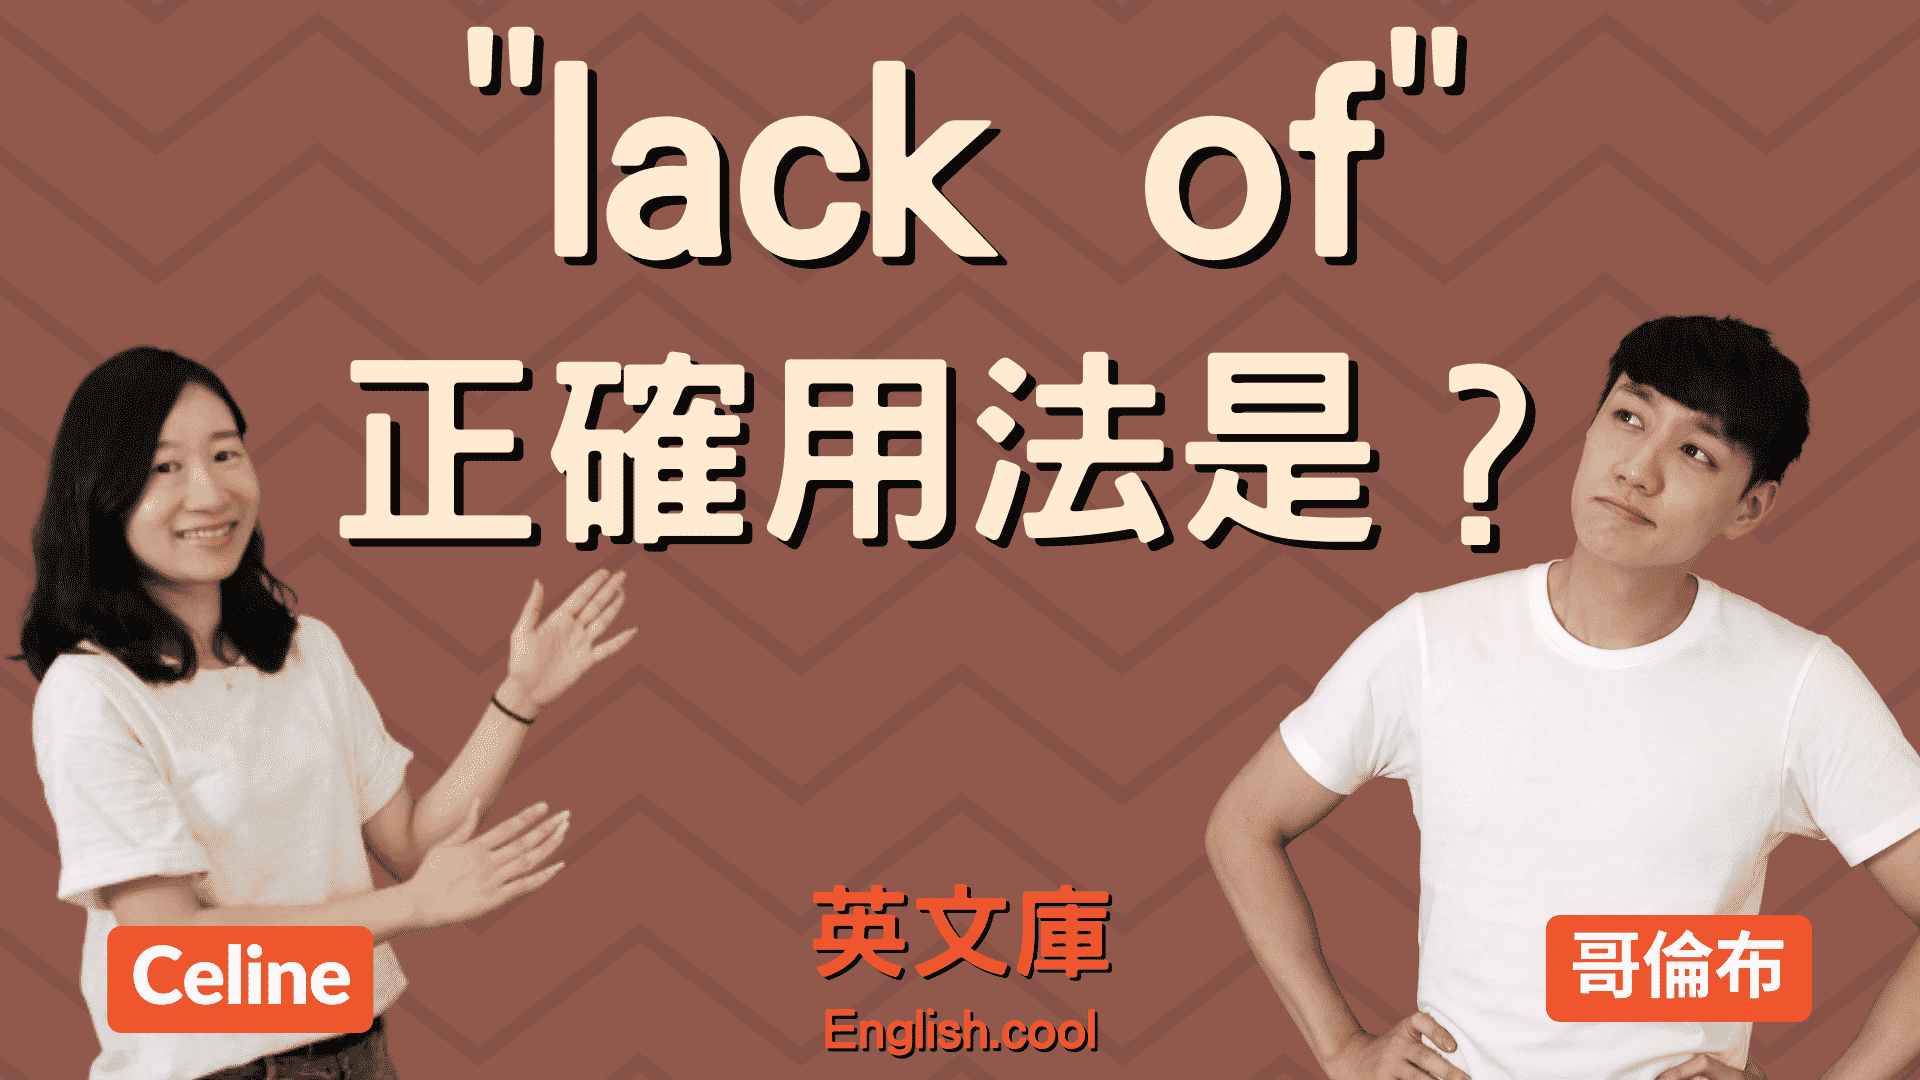 You are currently viewing 「lack of」正確用法是？跟 lack 一樣嗎？來看例句搞懂！